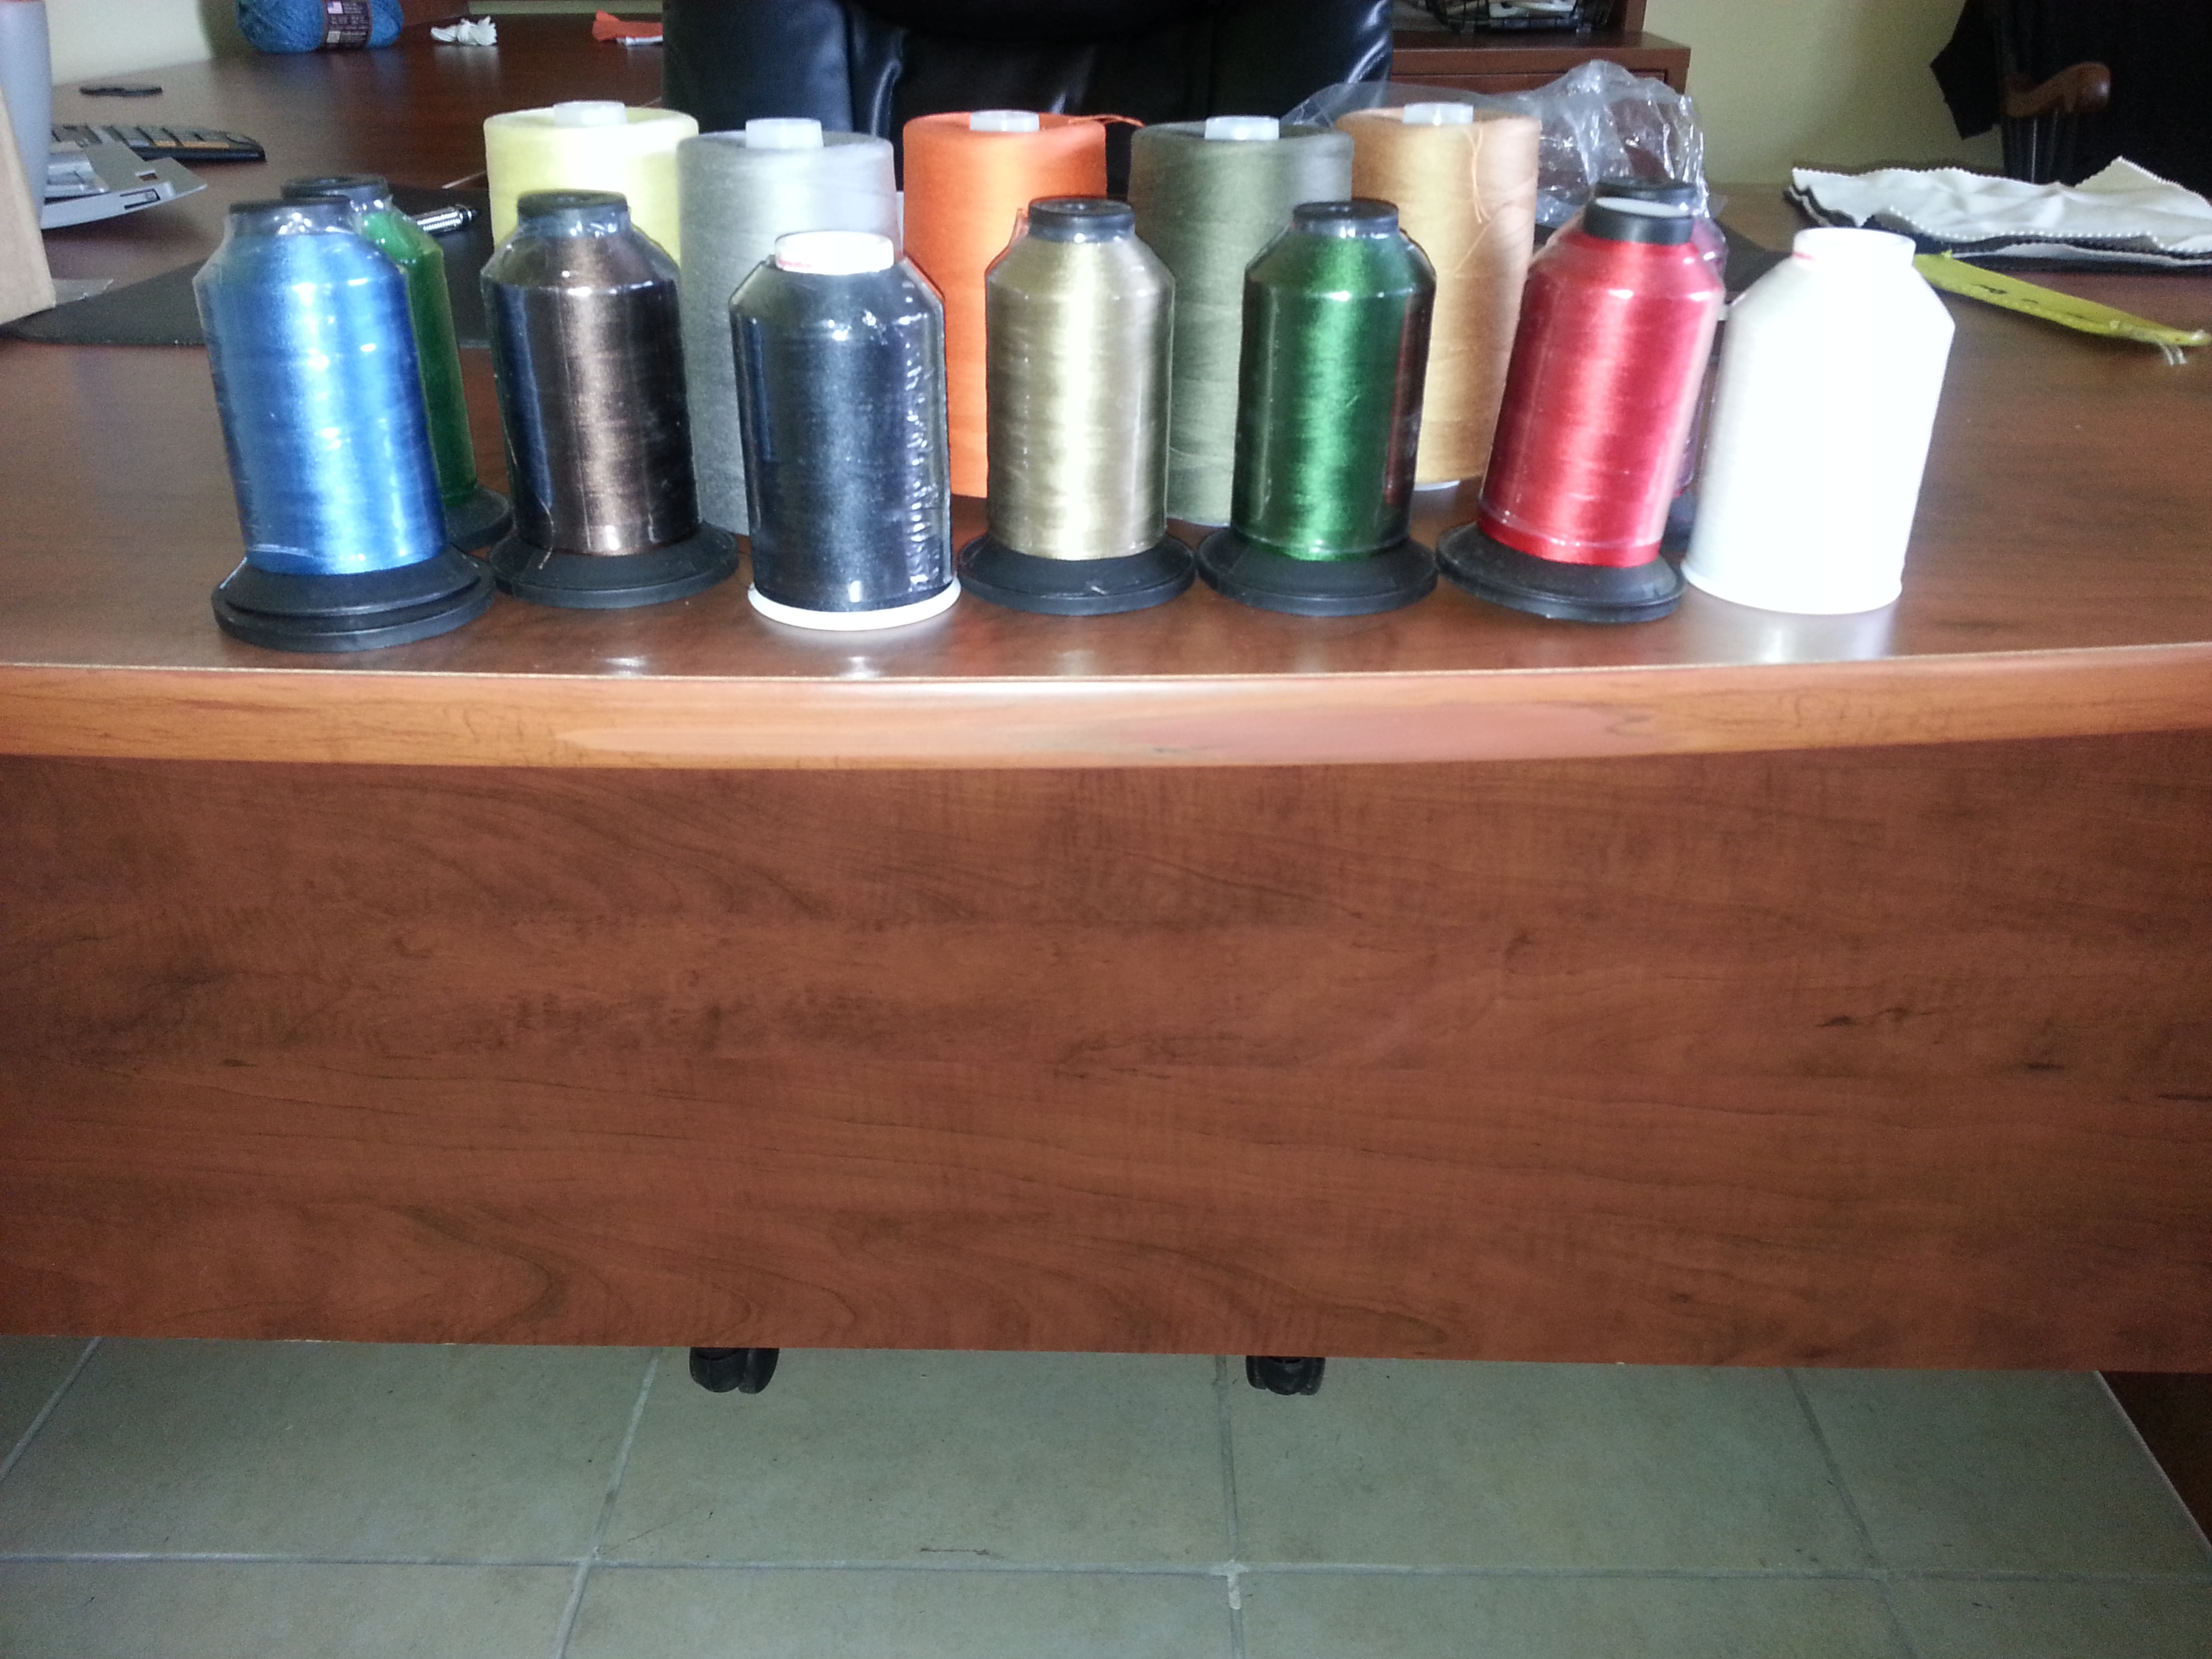 Cotton Sewing Thread on Spools